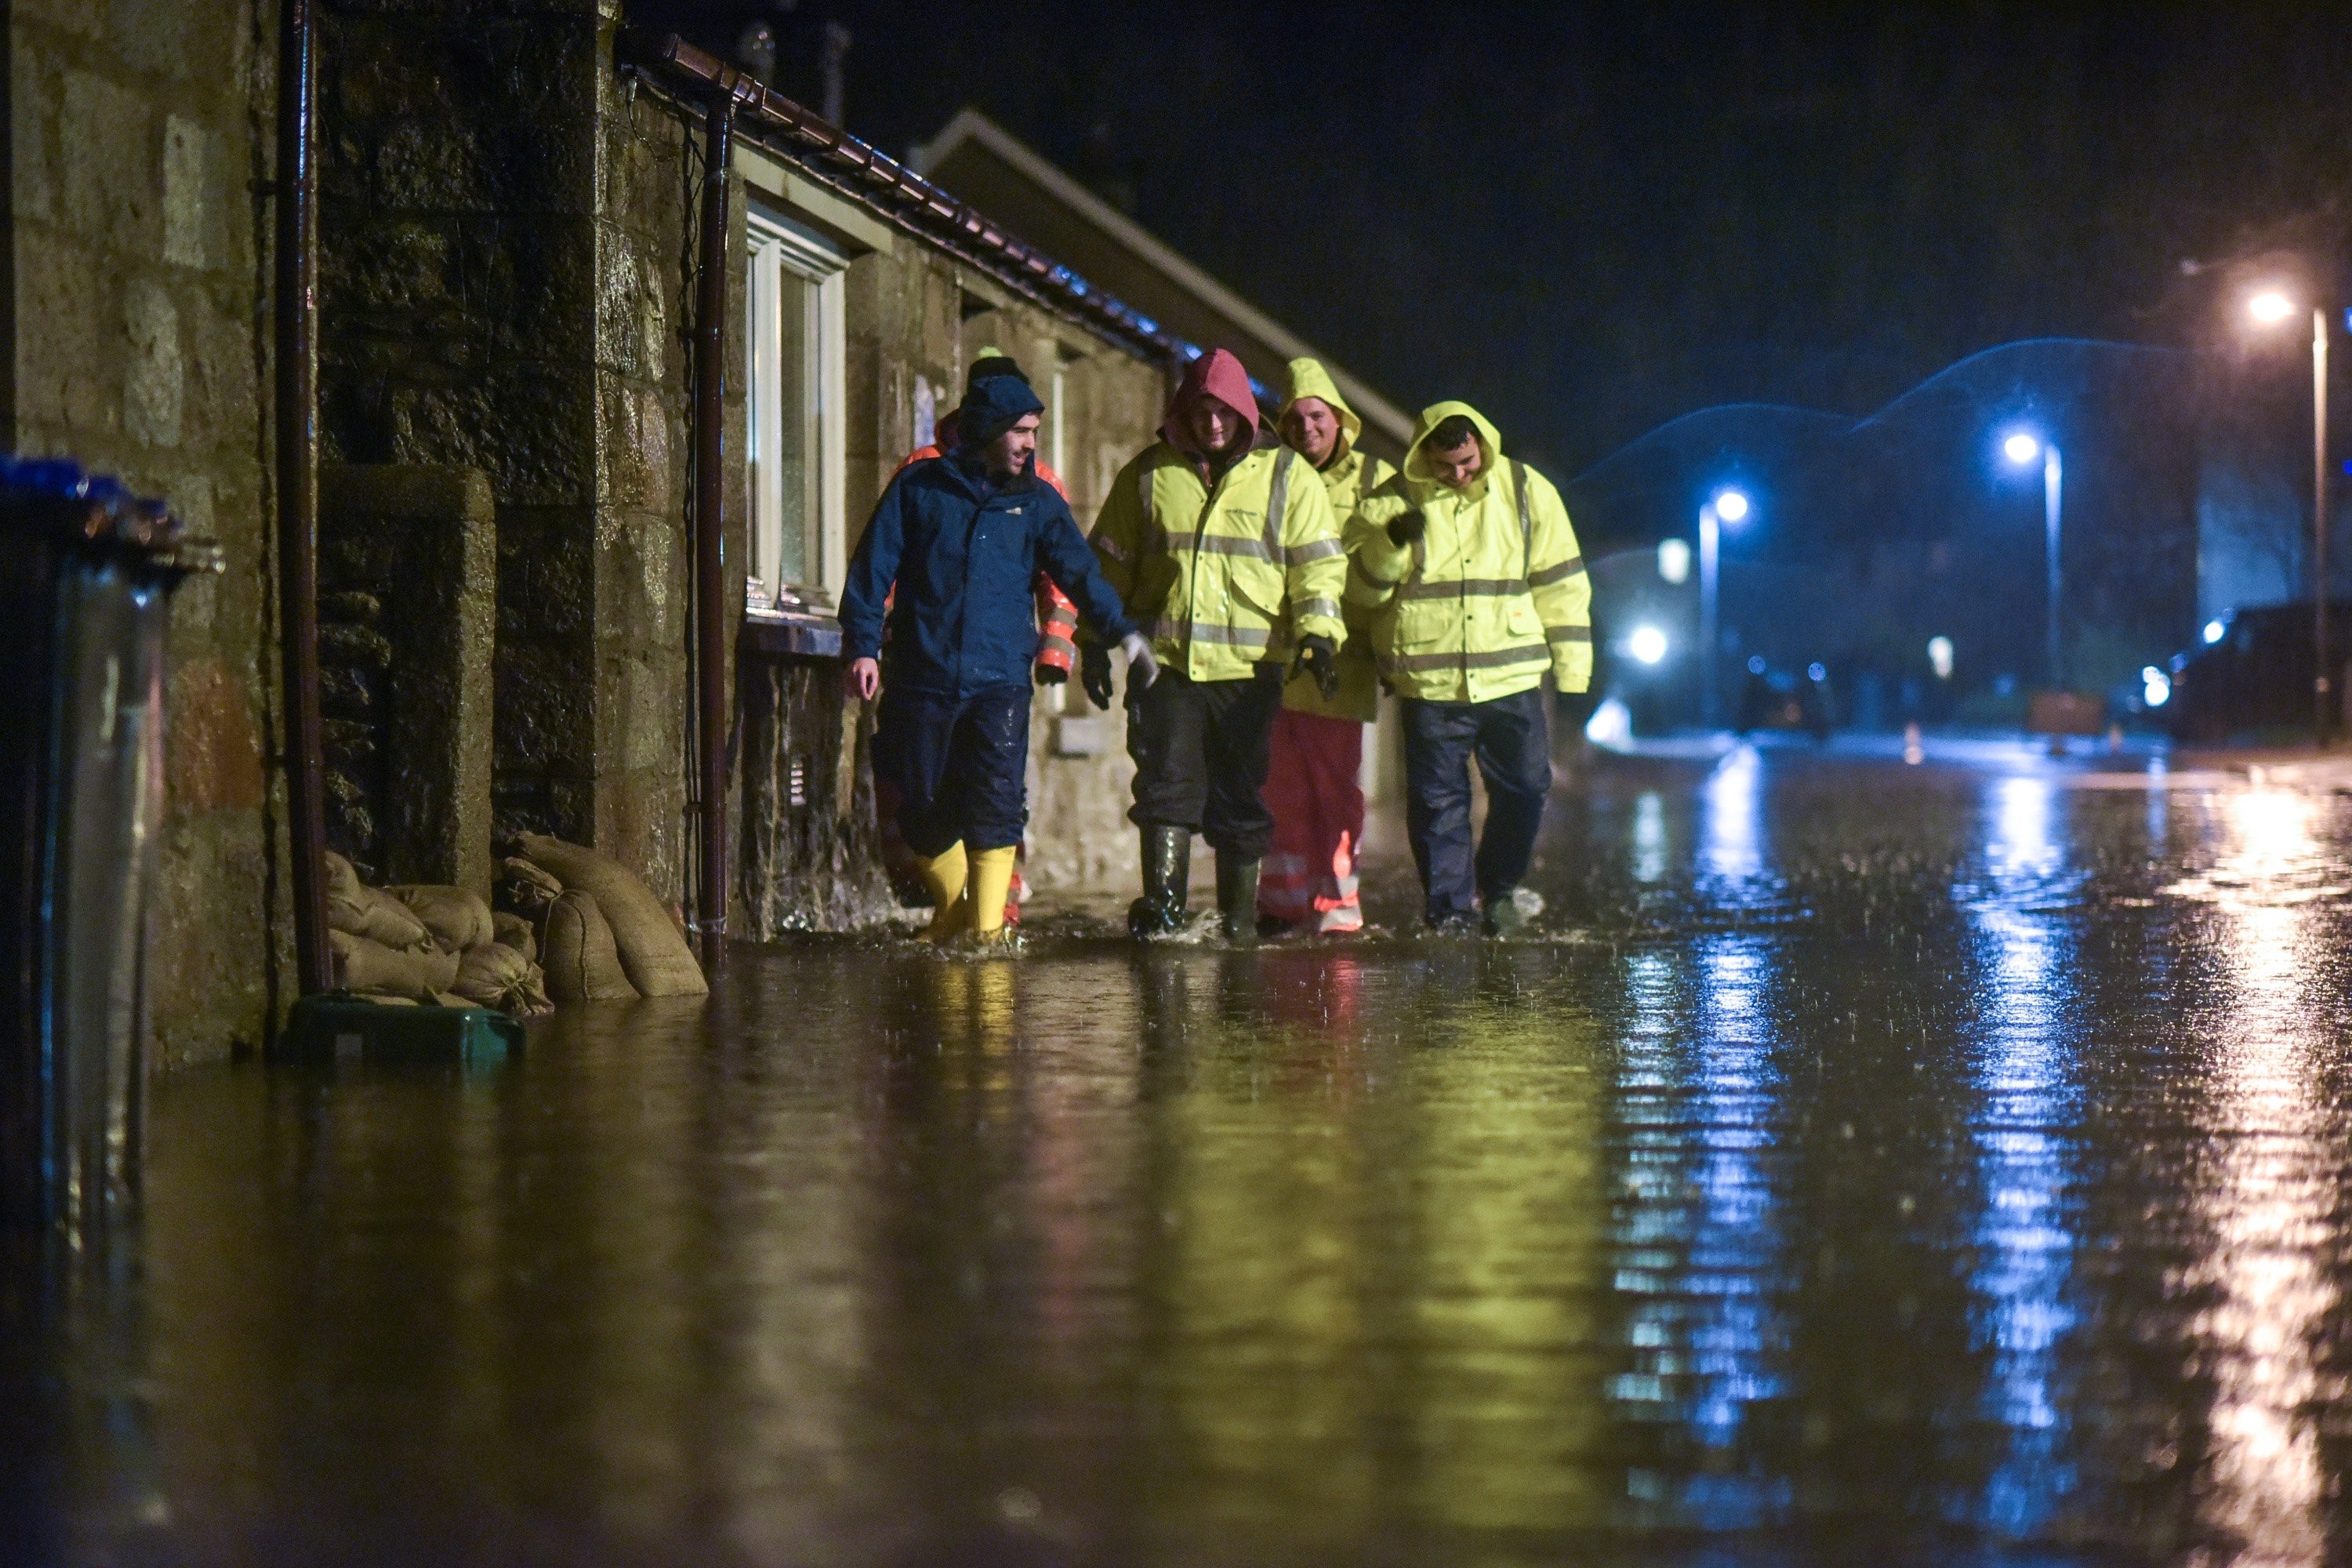 Men search homes in the Port Elphinstone area of Inverurie, Aberdeenshire as they begin to experience flooding after the River Don burst its banks on January 07 2016. Scottish Envornmental Protection Agency (SEPA) have issued two severe flood warnings for both Inverurie and Kintore, both in Aberdeenshire.